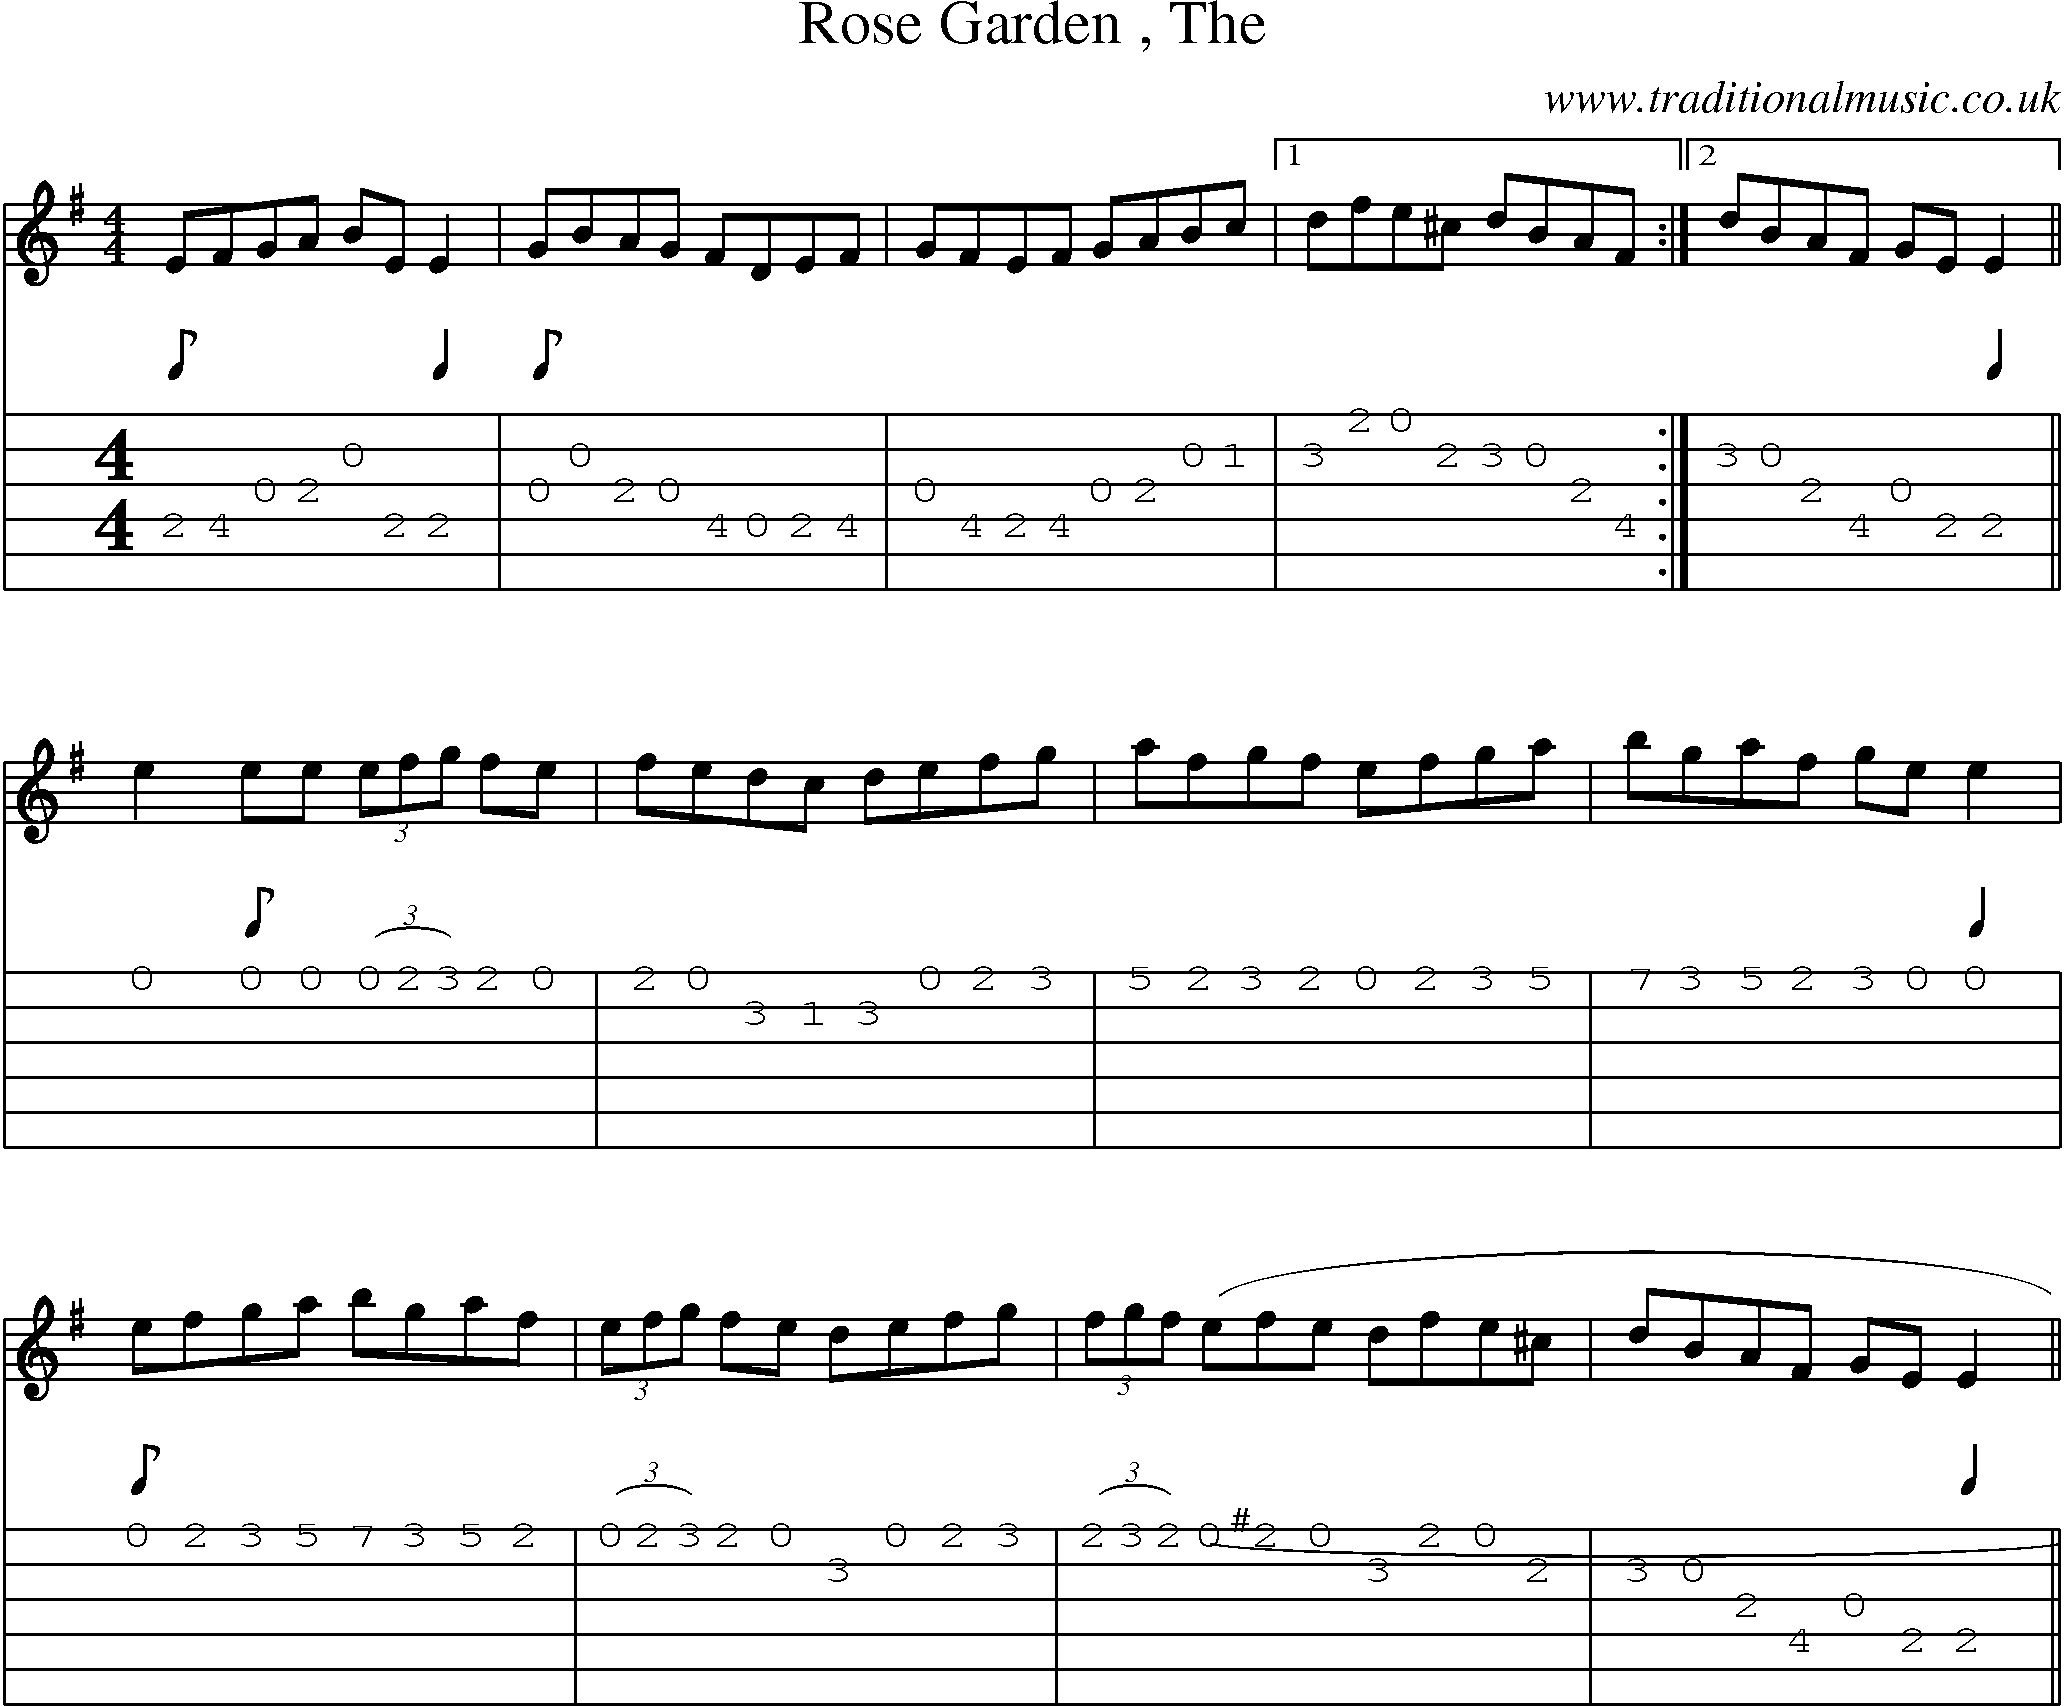 Music Score and Guitar Tabs for Rose Garden